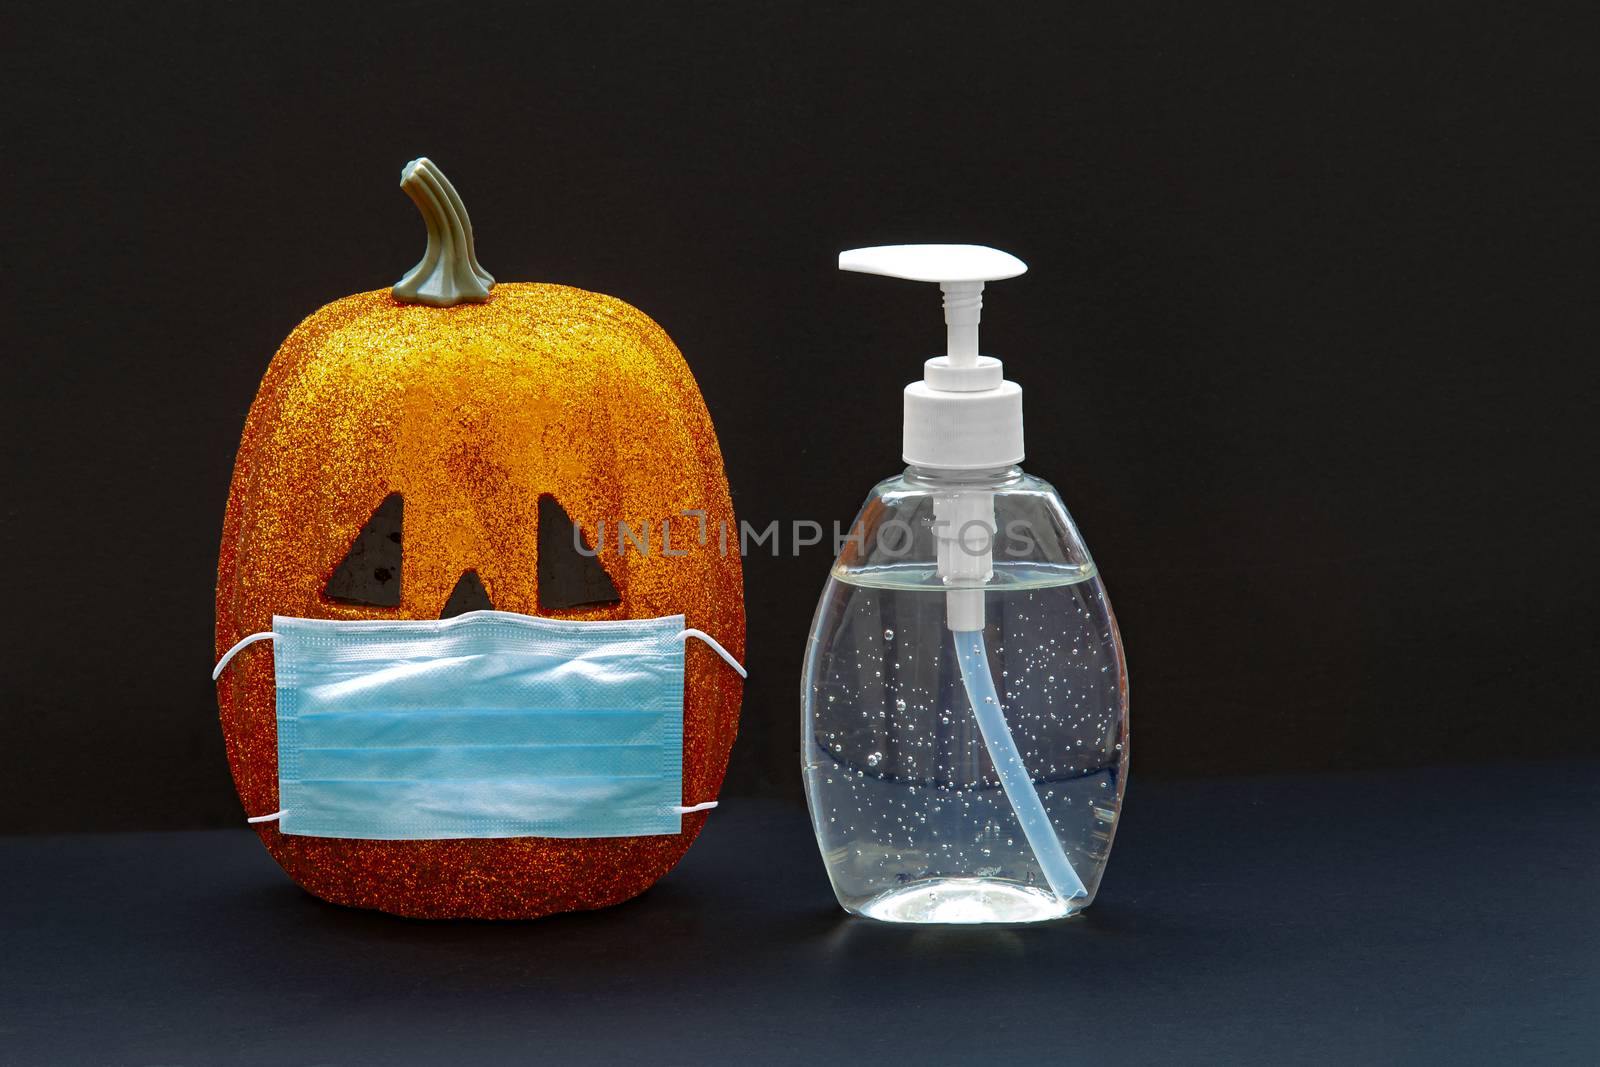 Jack-o-lantern pumpkin Halloween wearing a face mask with hand sanitizer bottle on a black background. Concept: Halloween during global pandemic. Covid-19, Coronavirus. by oasisamuel